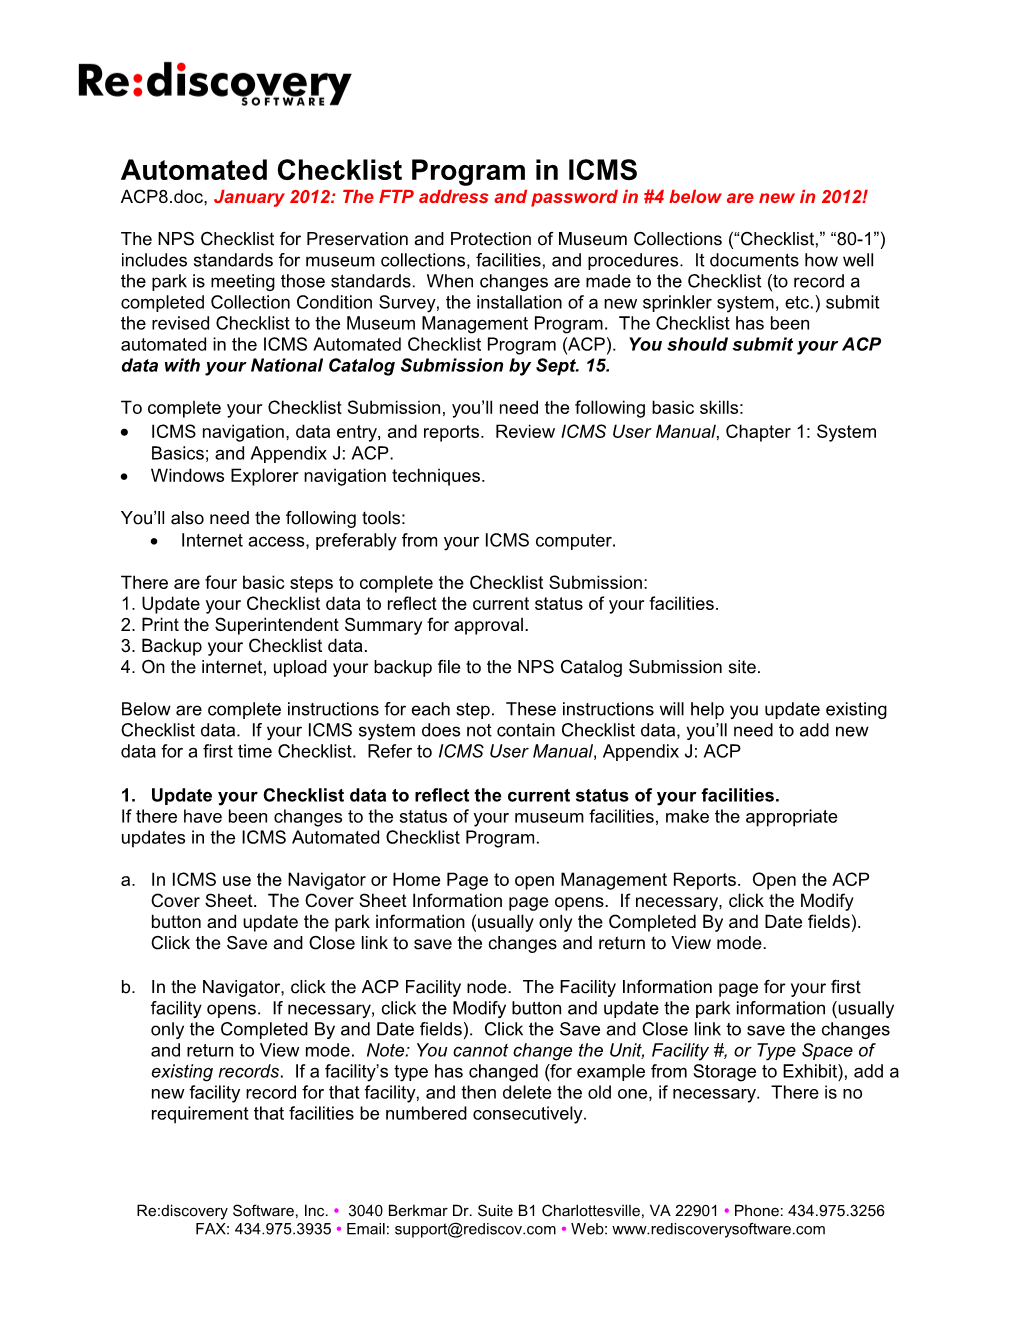 Using the Automated Checklist Program in ANCS+